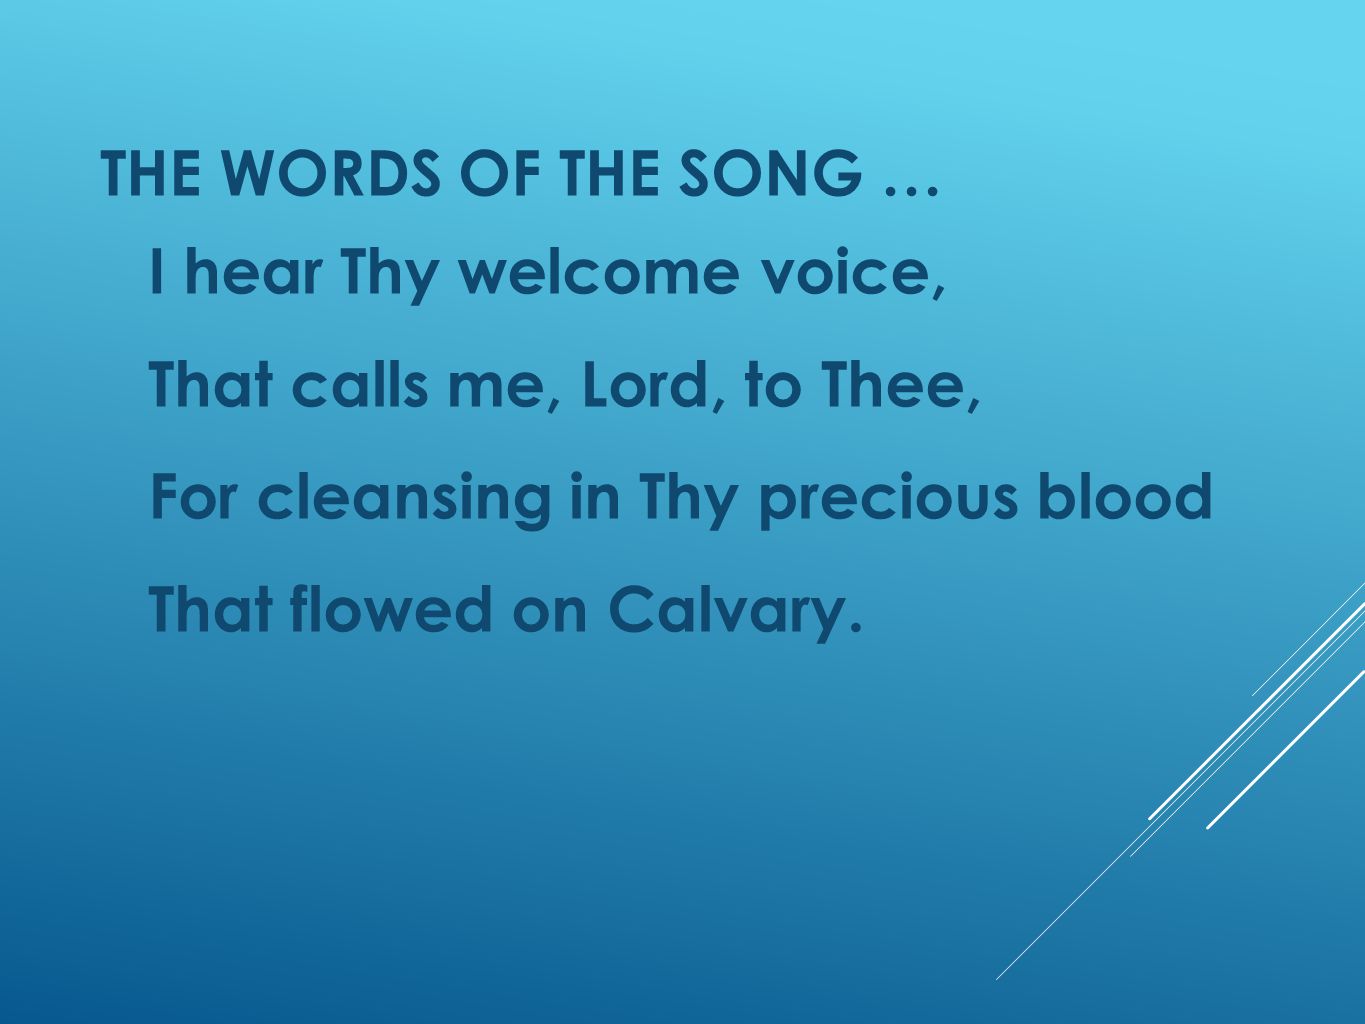 THE WORDS OF THE SONG … I hear Thy welcome voice, That calls me, Lord, to Thee, For cleansing in Thy precious blood That flowed on Calvary.